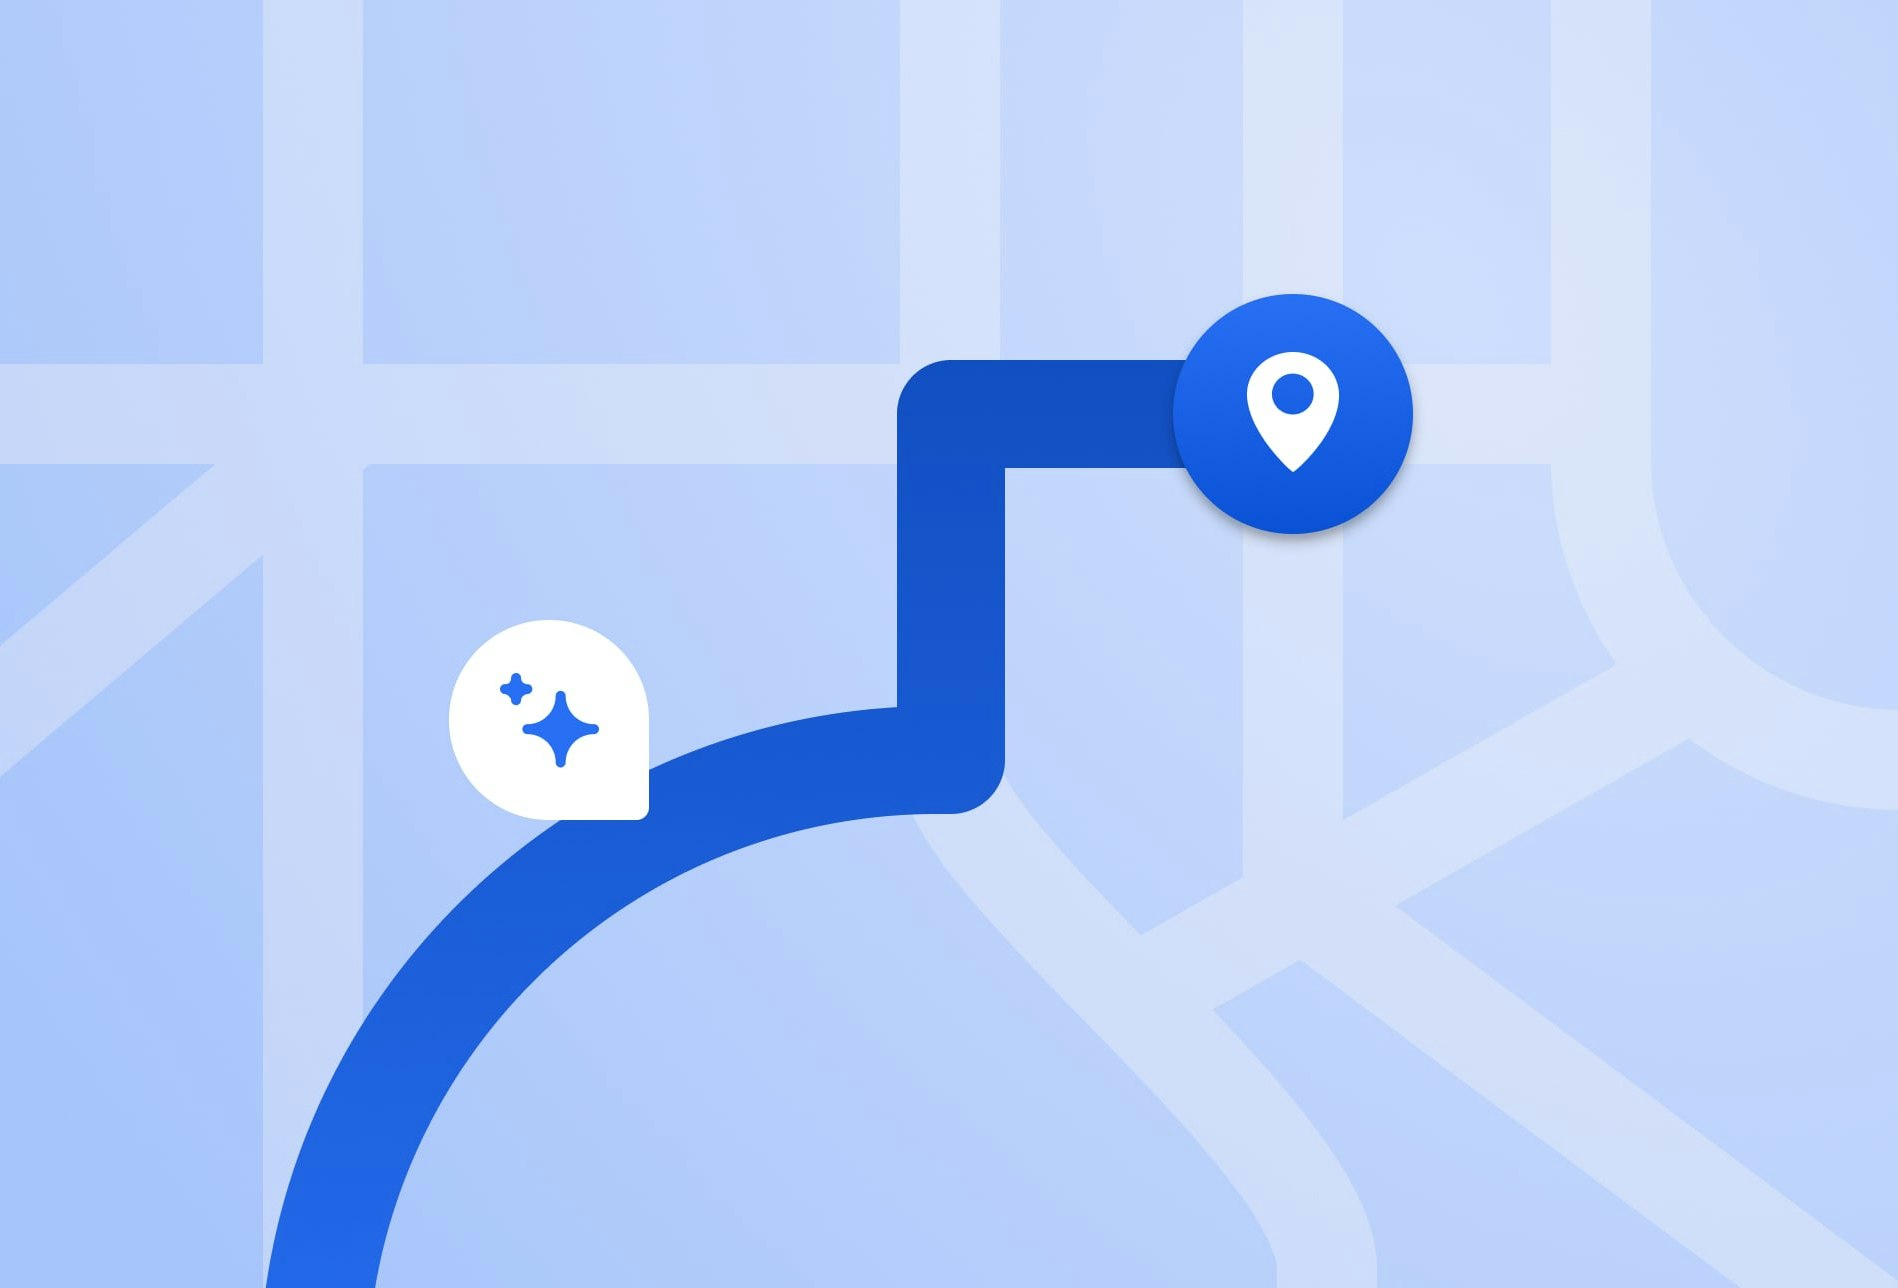 Animated GPS map with destination icons